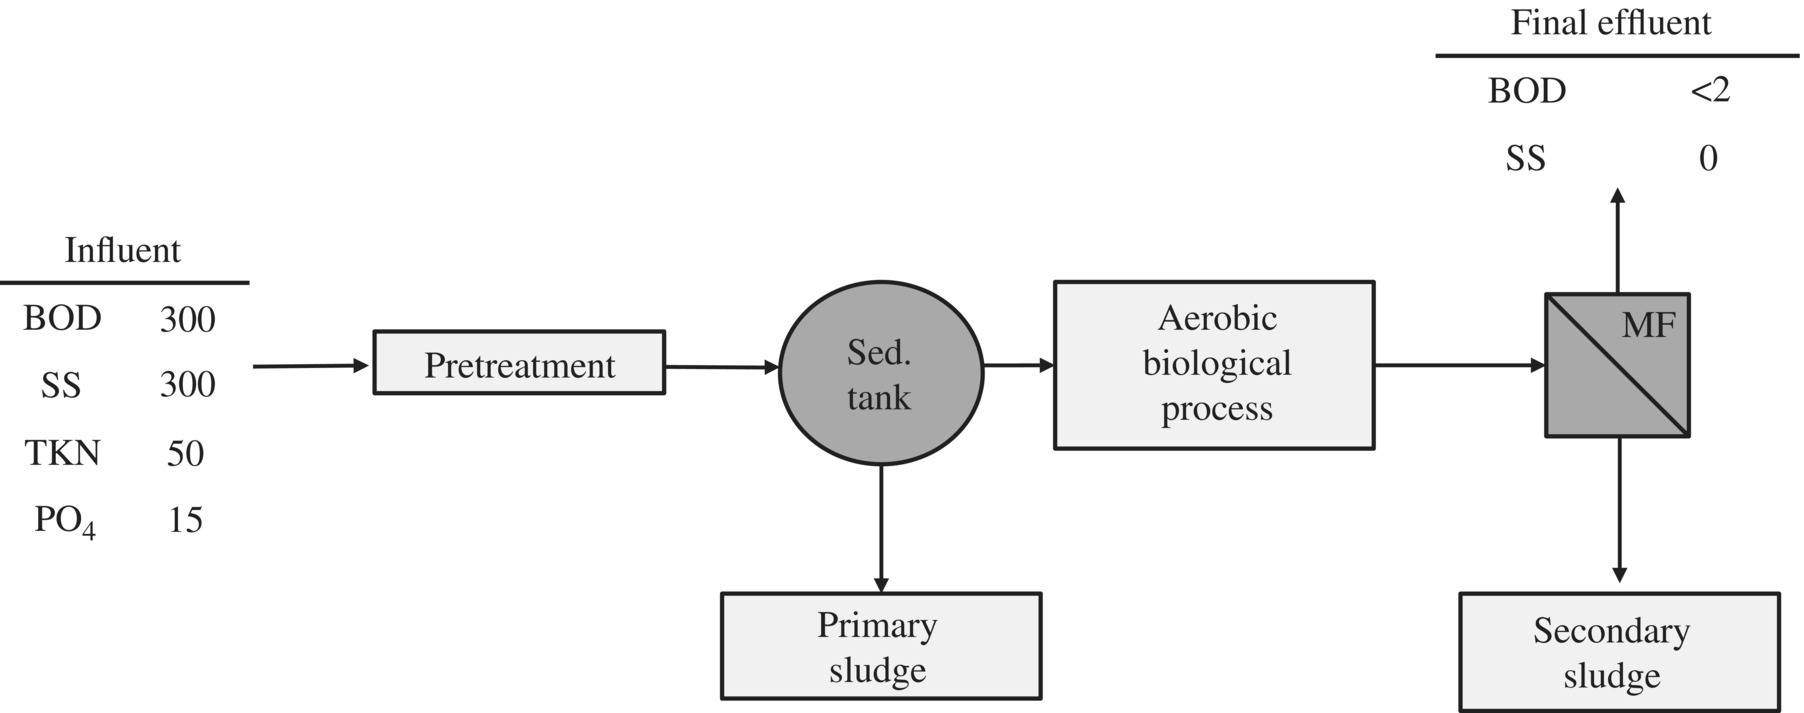 Flow diagram from “Influent” to “Pretreatment,” to “Sed. tank,” to “Aerobic biological process,” to “MF,” and to “Final effluent”. Sed. tank and MF have down arrows to primary and secondary sludge, respectively.